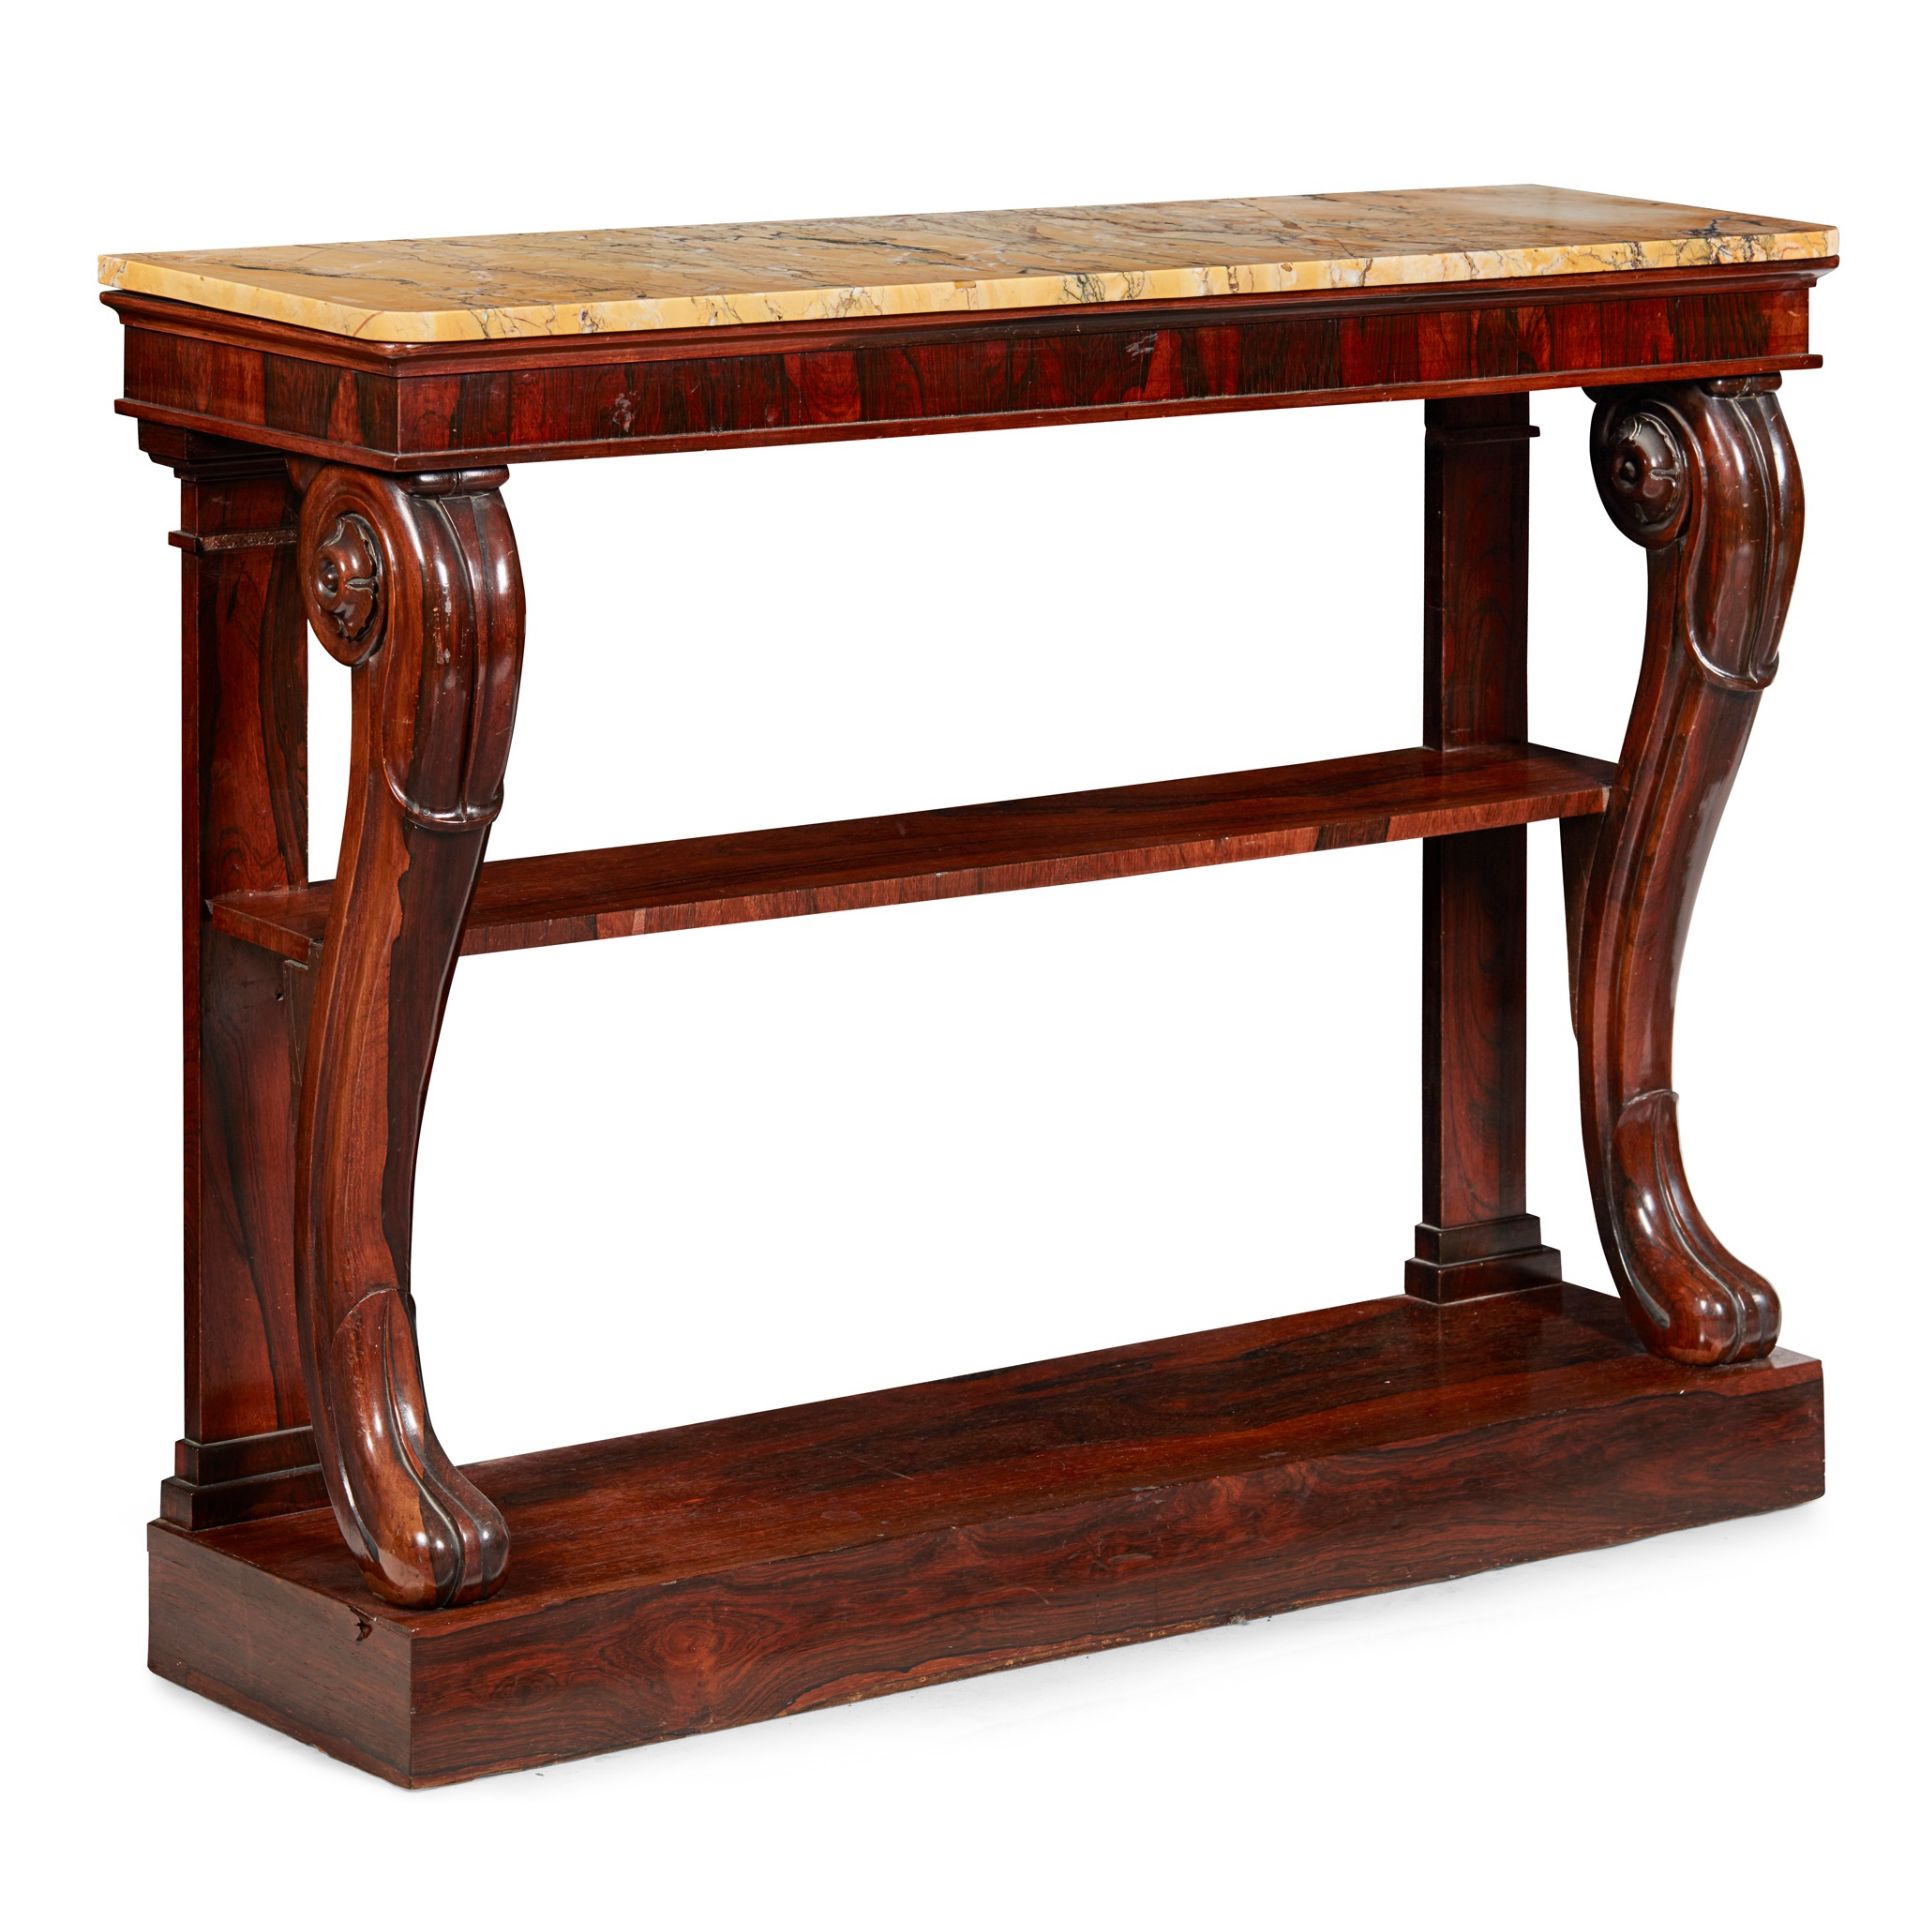 Y REGENCY ROSEWOOD MARBLE TOP CONSOLE TABLE EARLY 19TH CENTURY